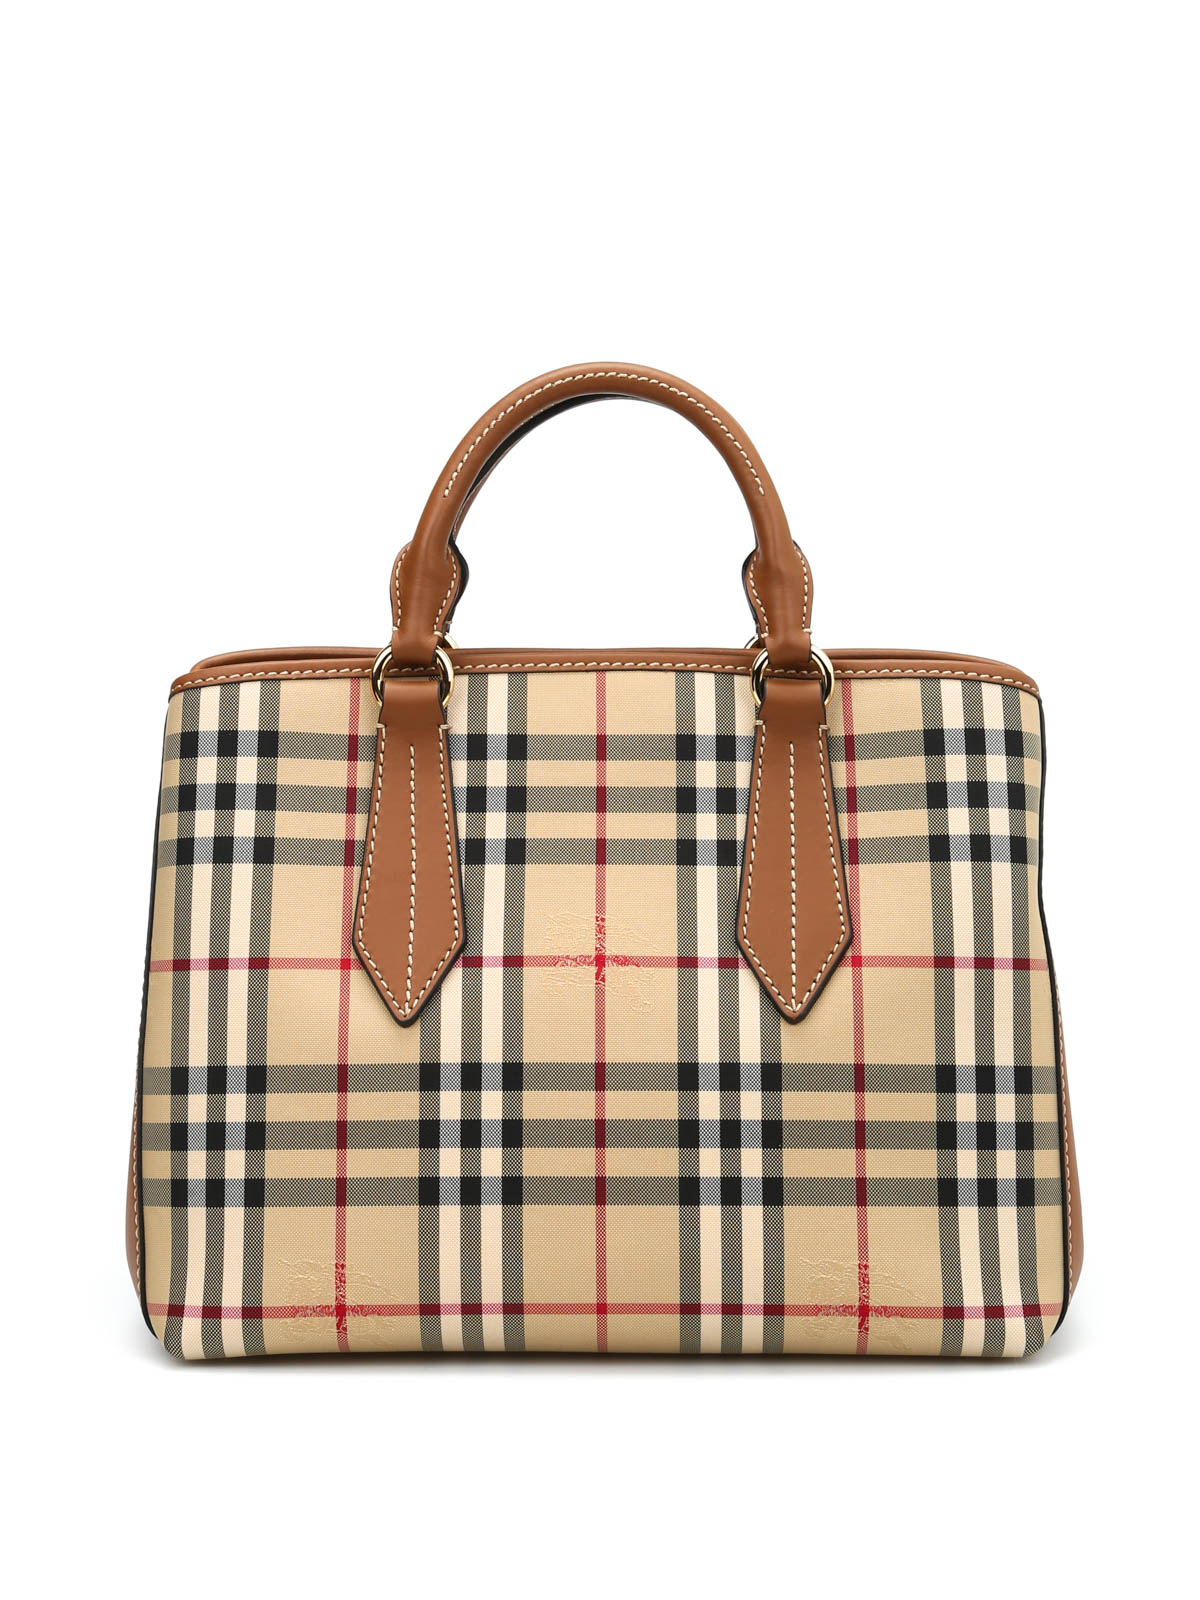 Burberry Tote Bags | IUCN Water